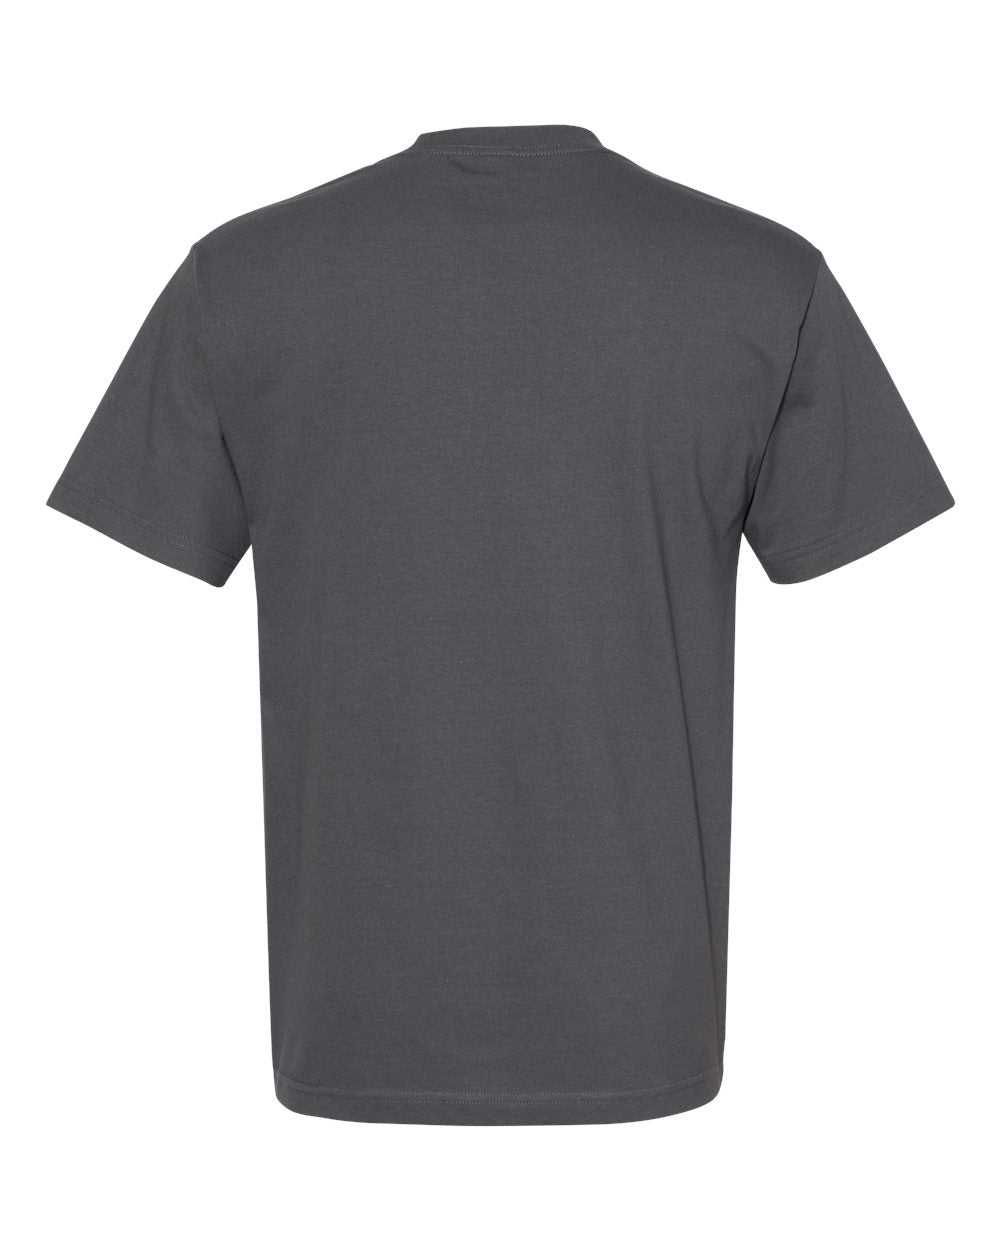 American Apparel 1301 Unisex Heavyweight Cotton T-Shirt - Charcoal - HIT a Double